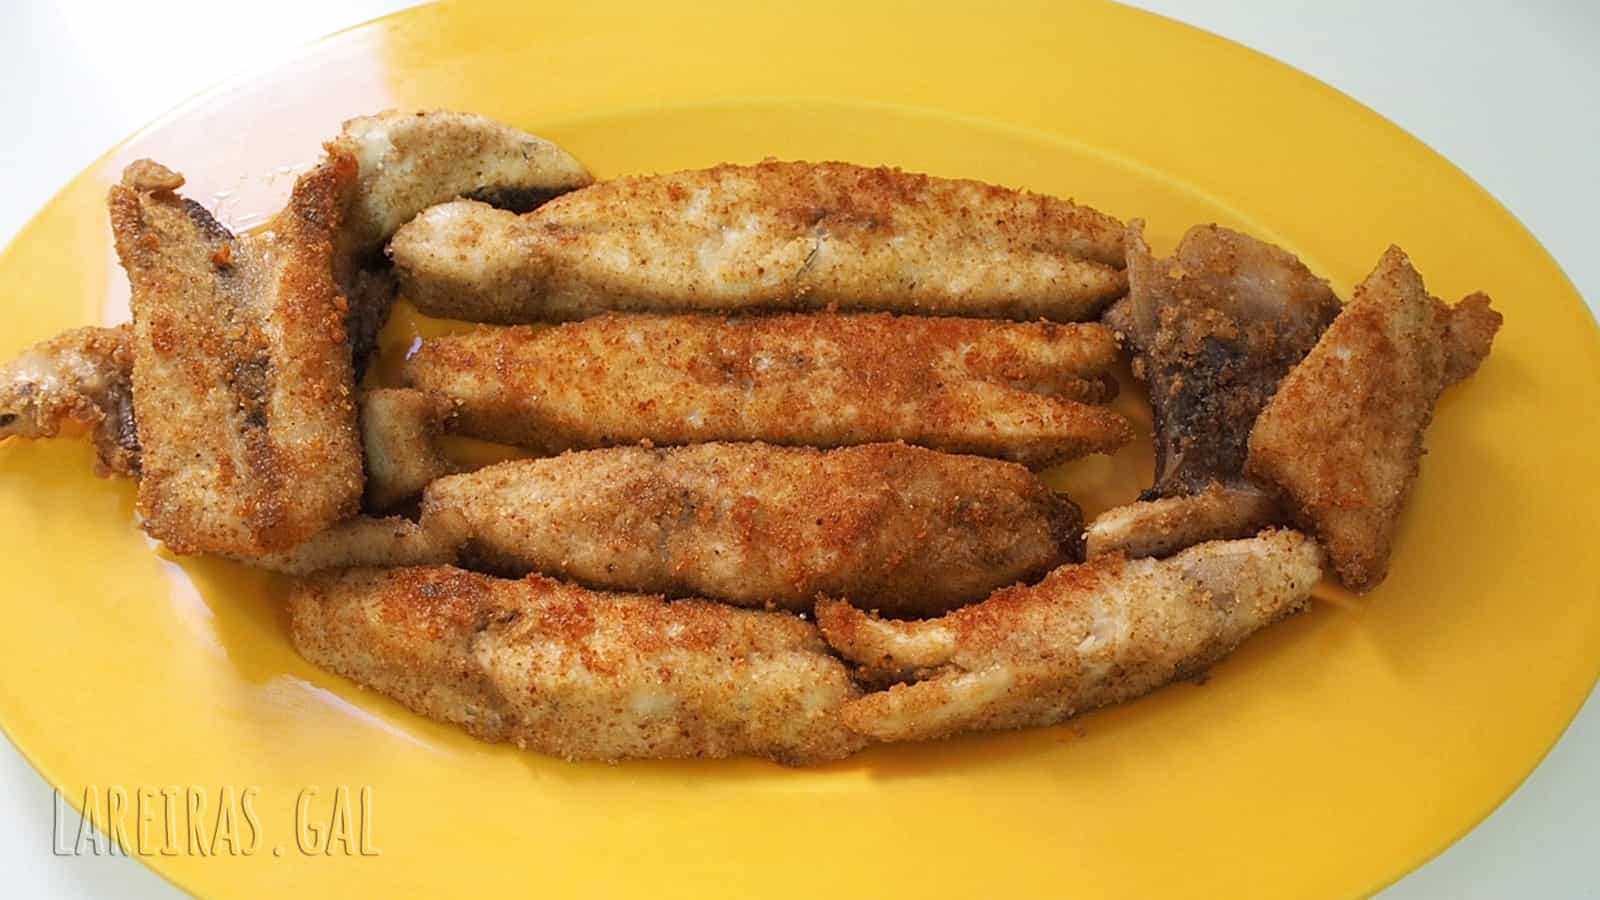 Crumbed pomfret with garlic